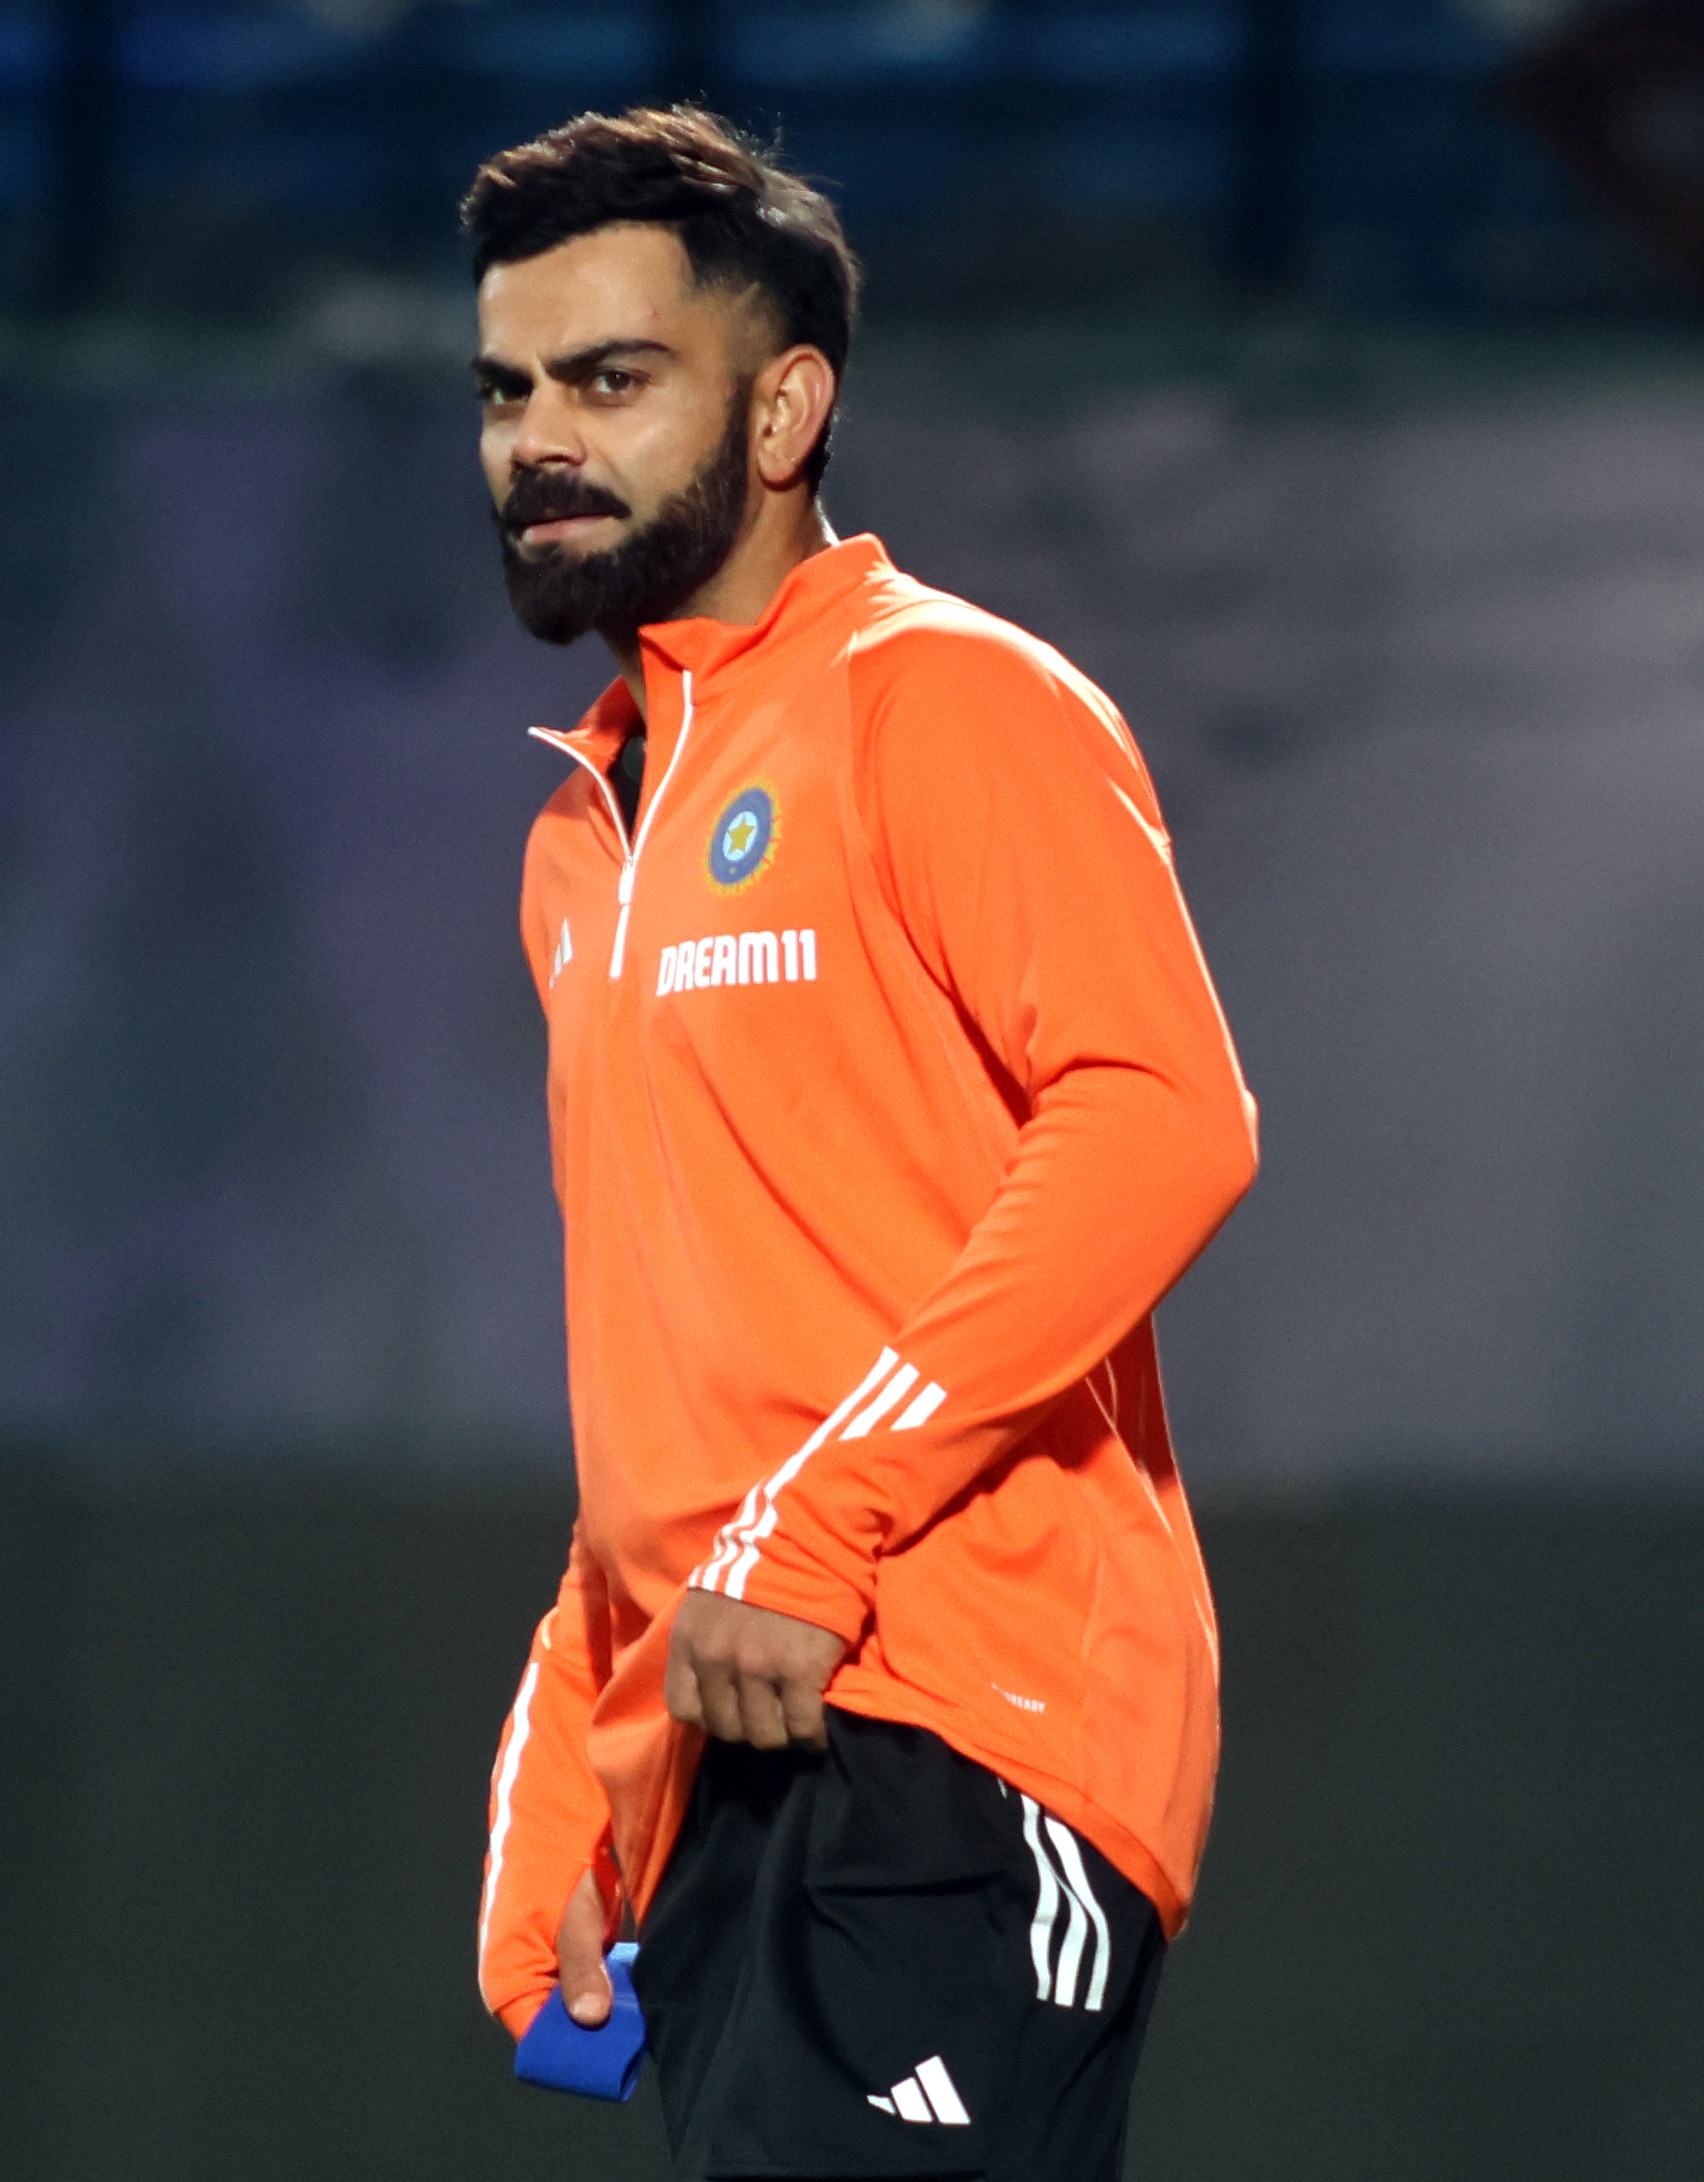 Virat kohli need 9 fours to become batsman with most fours in T20 World Cup 